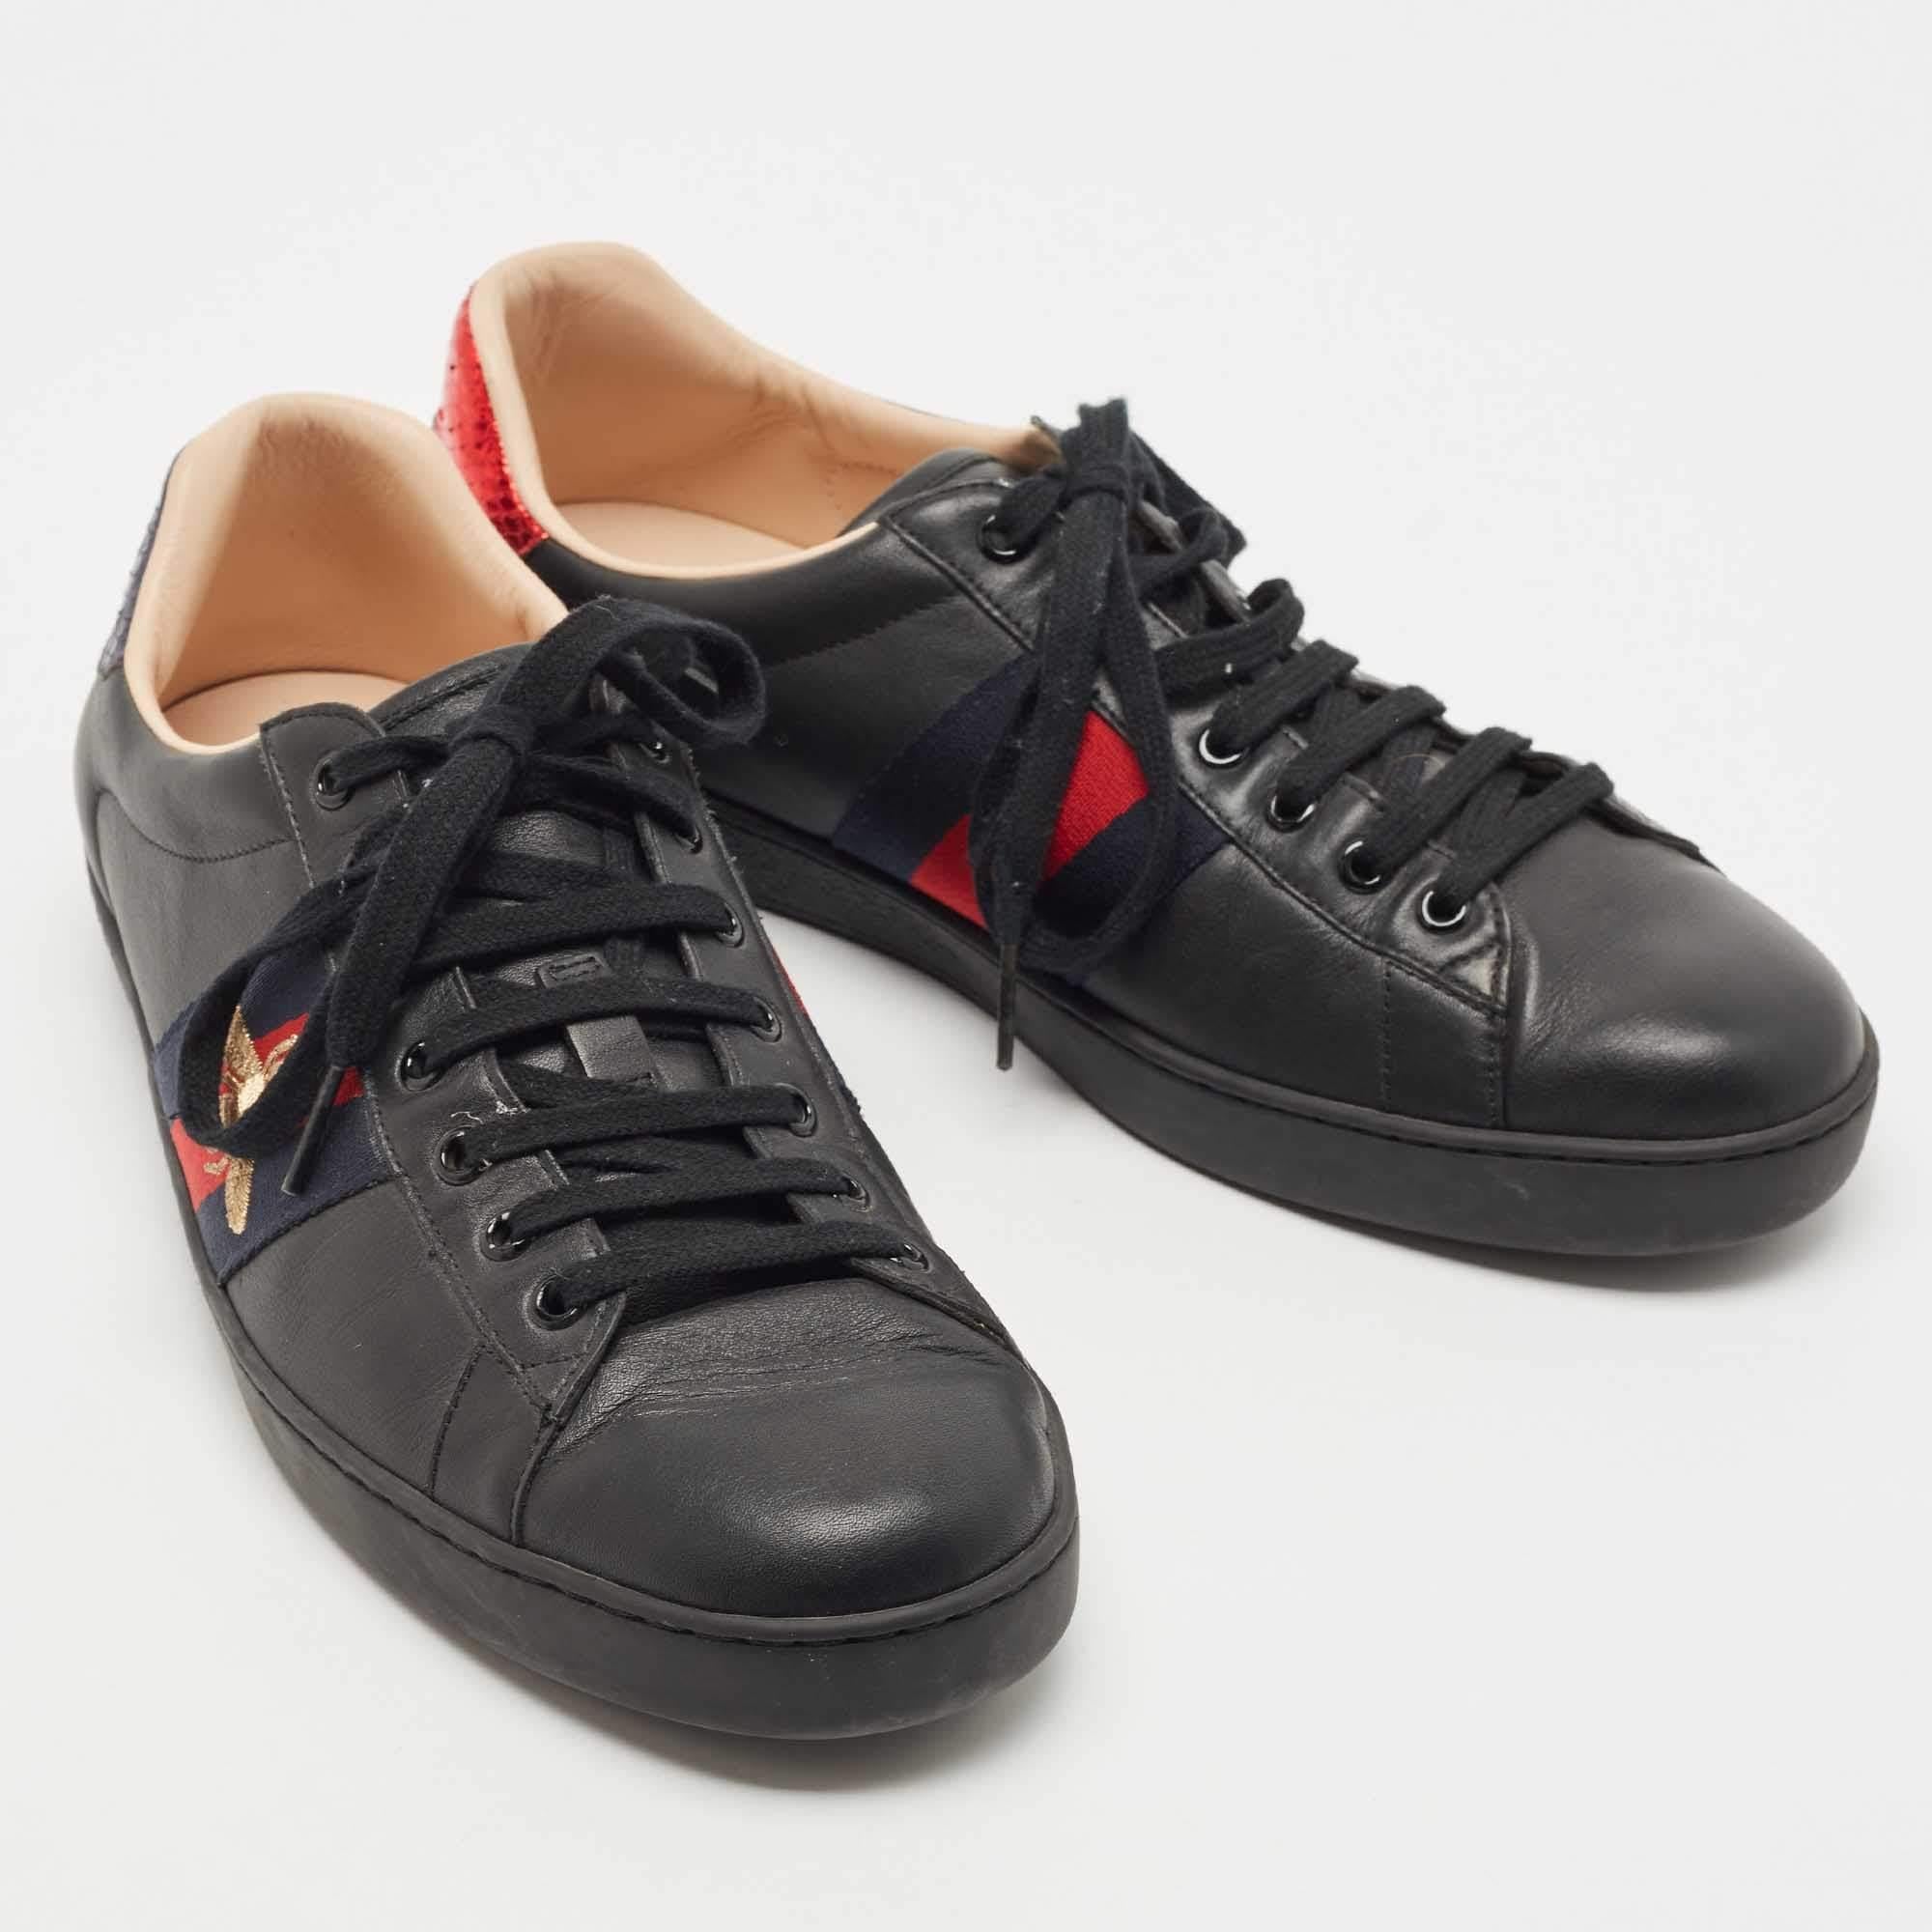 Gucci Black Leather Ace Low Top Sneakers Size 44 1